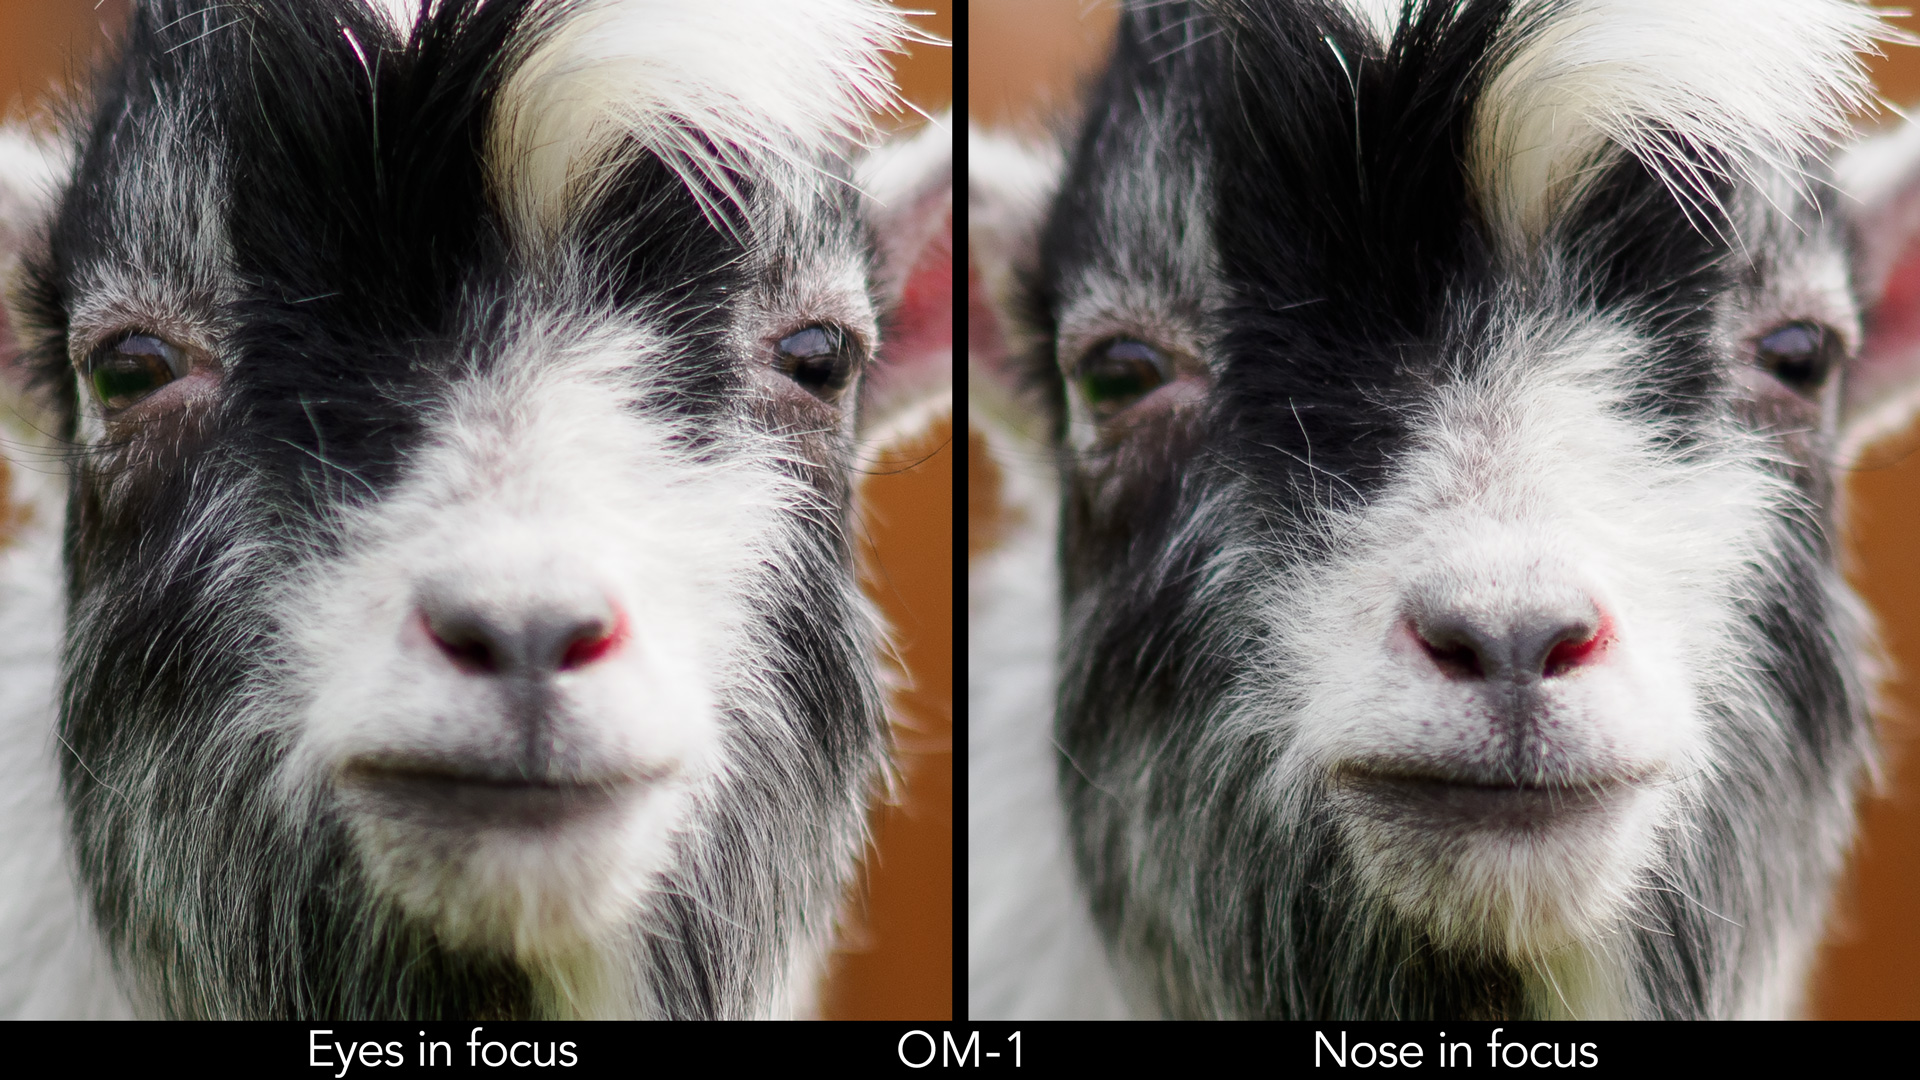 side by side portrait of a goat, showing the eyes in focus on the left and the nose in focus on the right